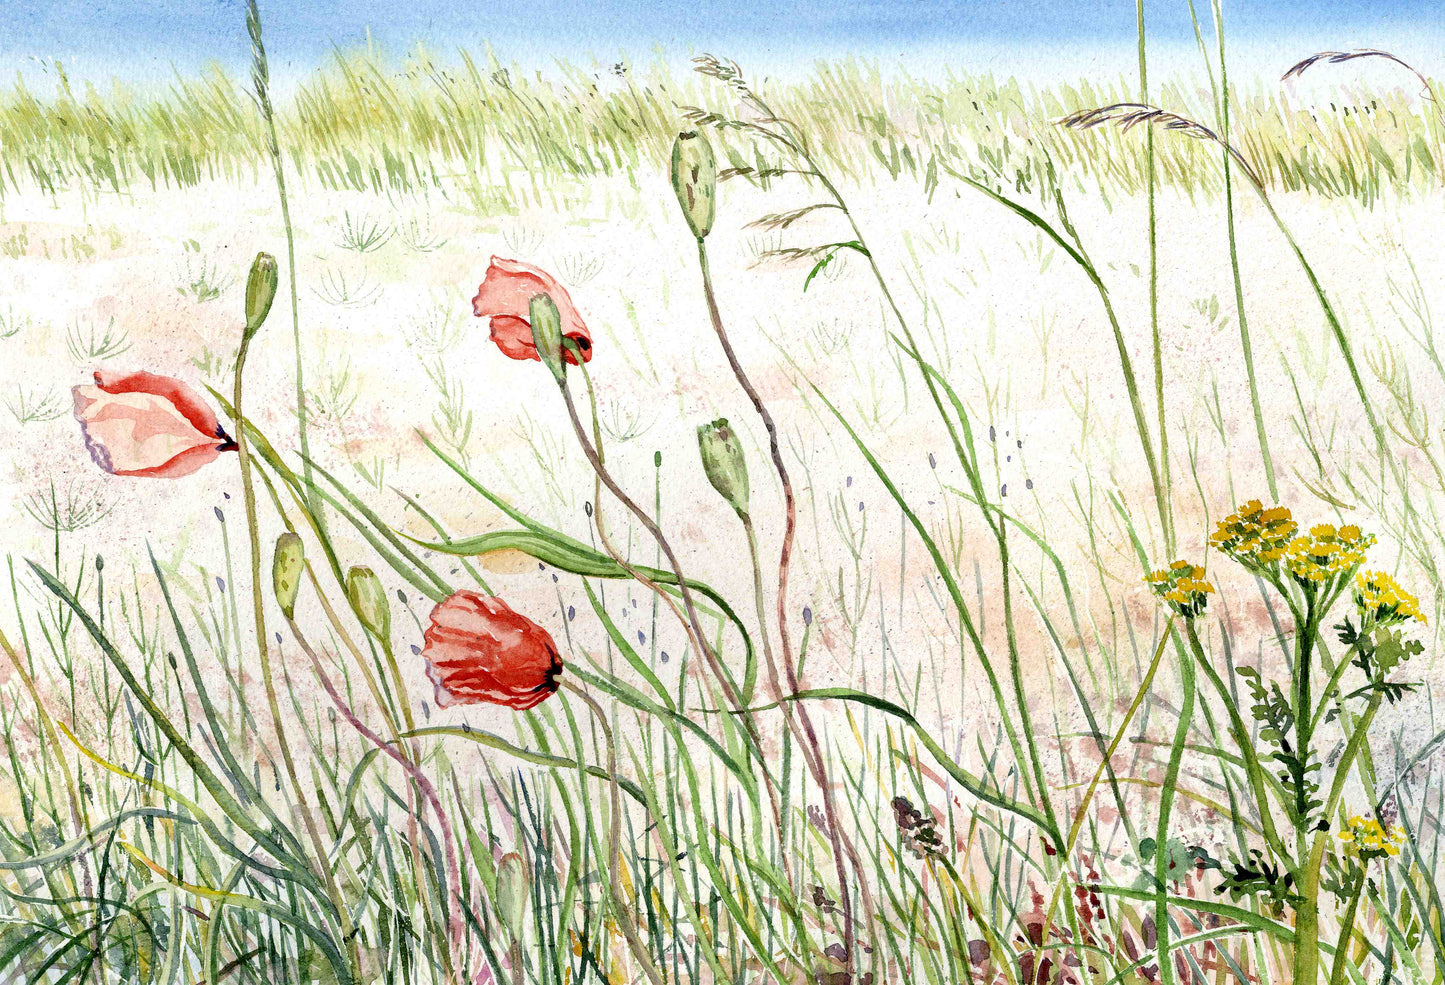 Sale/ framed print/Wildflowers, grasses and sand dunes